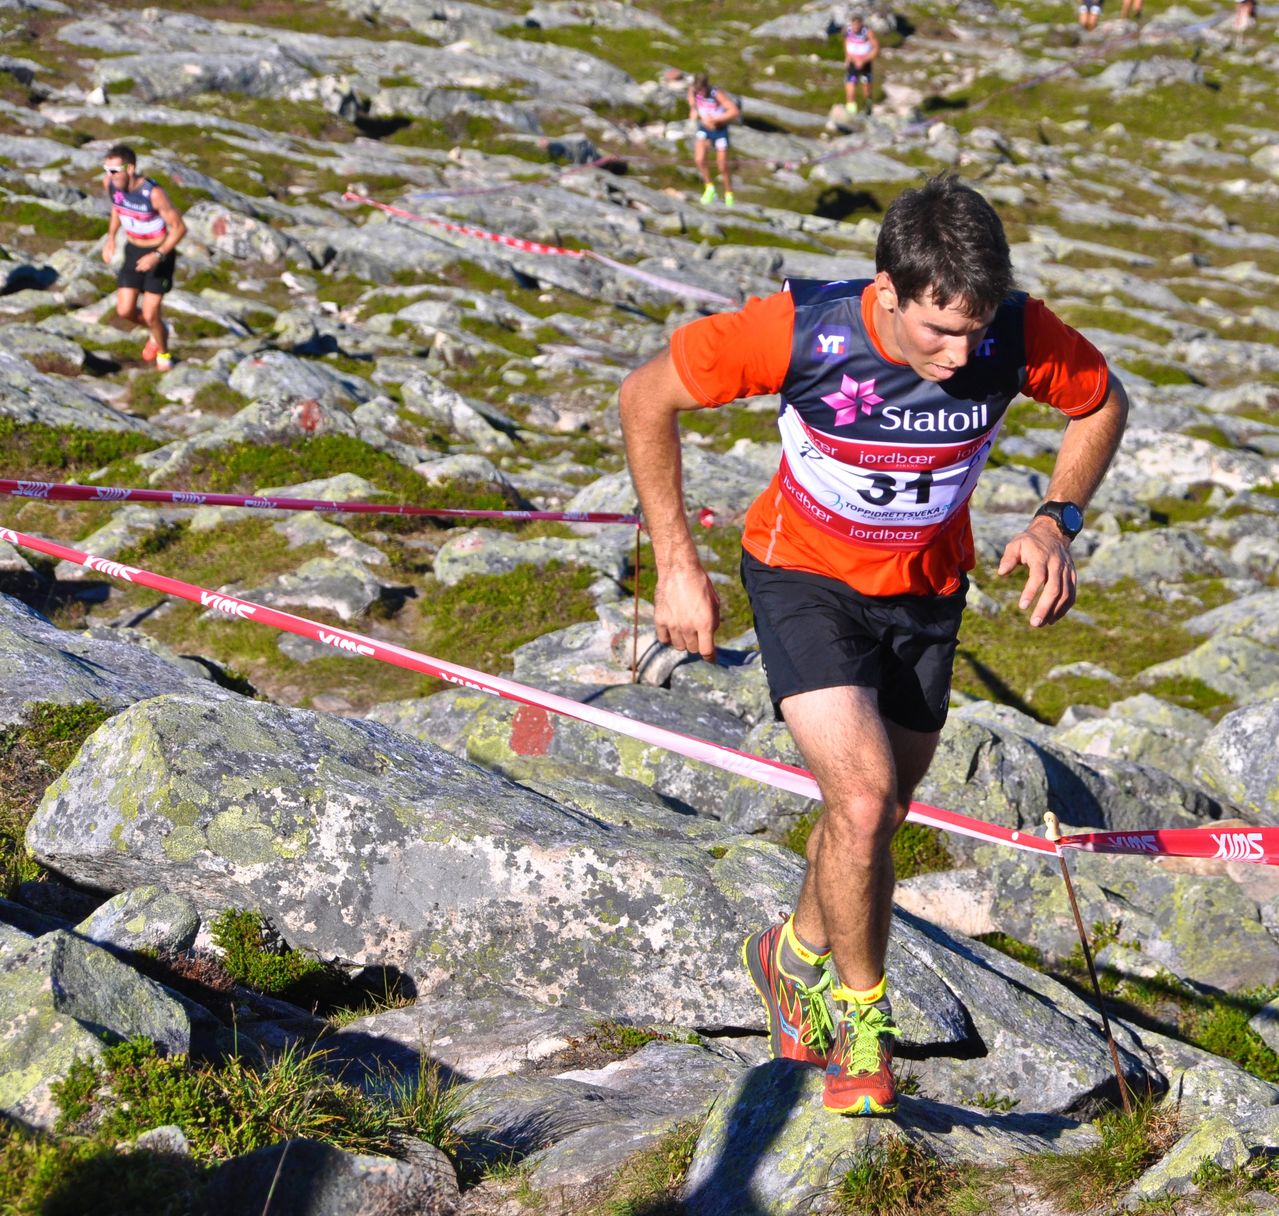 Noah Hoffman (U.S. Ski Team) racing to third in the Fonna Opp, the hill climb footrace that opened the 2015 Toppidrettsveka in Aure, Norway. Norway's Didrik Tønseth was first to the top in 28:53.5, and Sweden’s Martin Johansson placed second, 13 seconds back, while Hoffman was 1:02.5 back in third. (Photo: USSA)